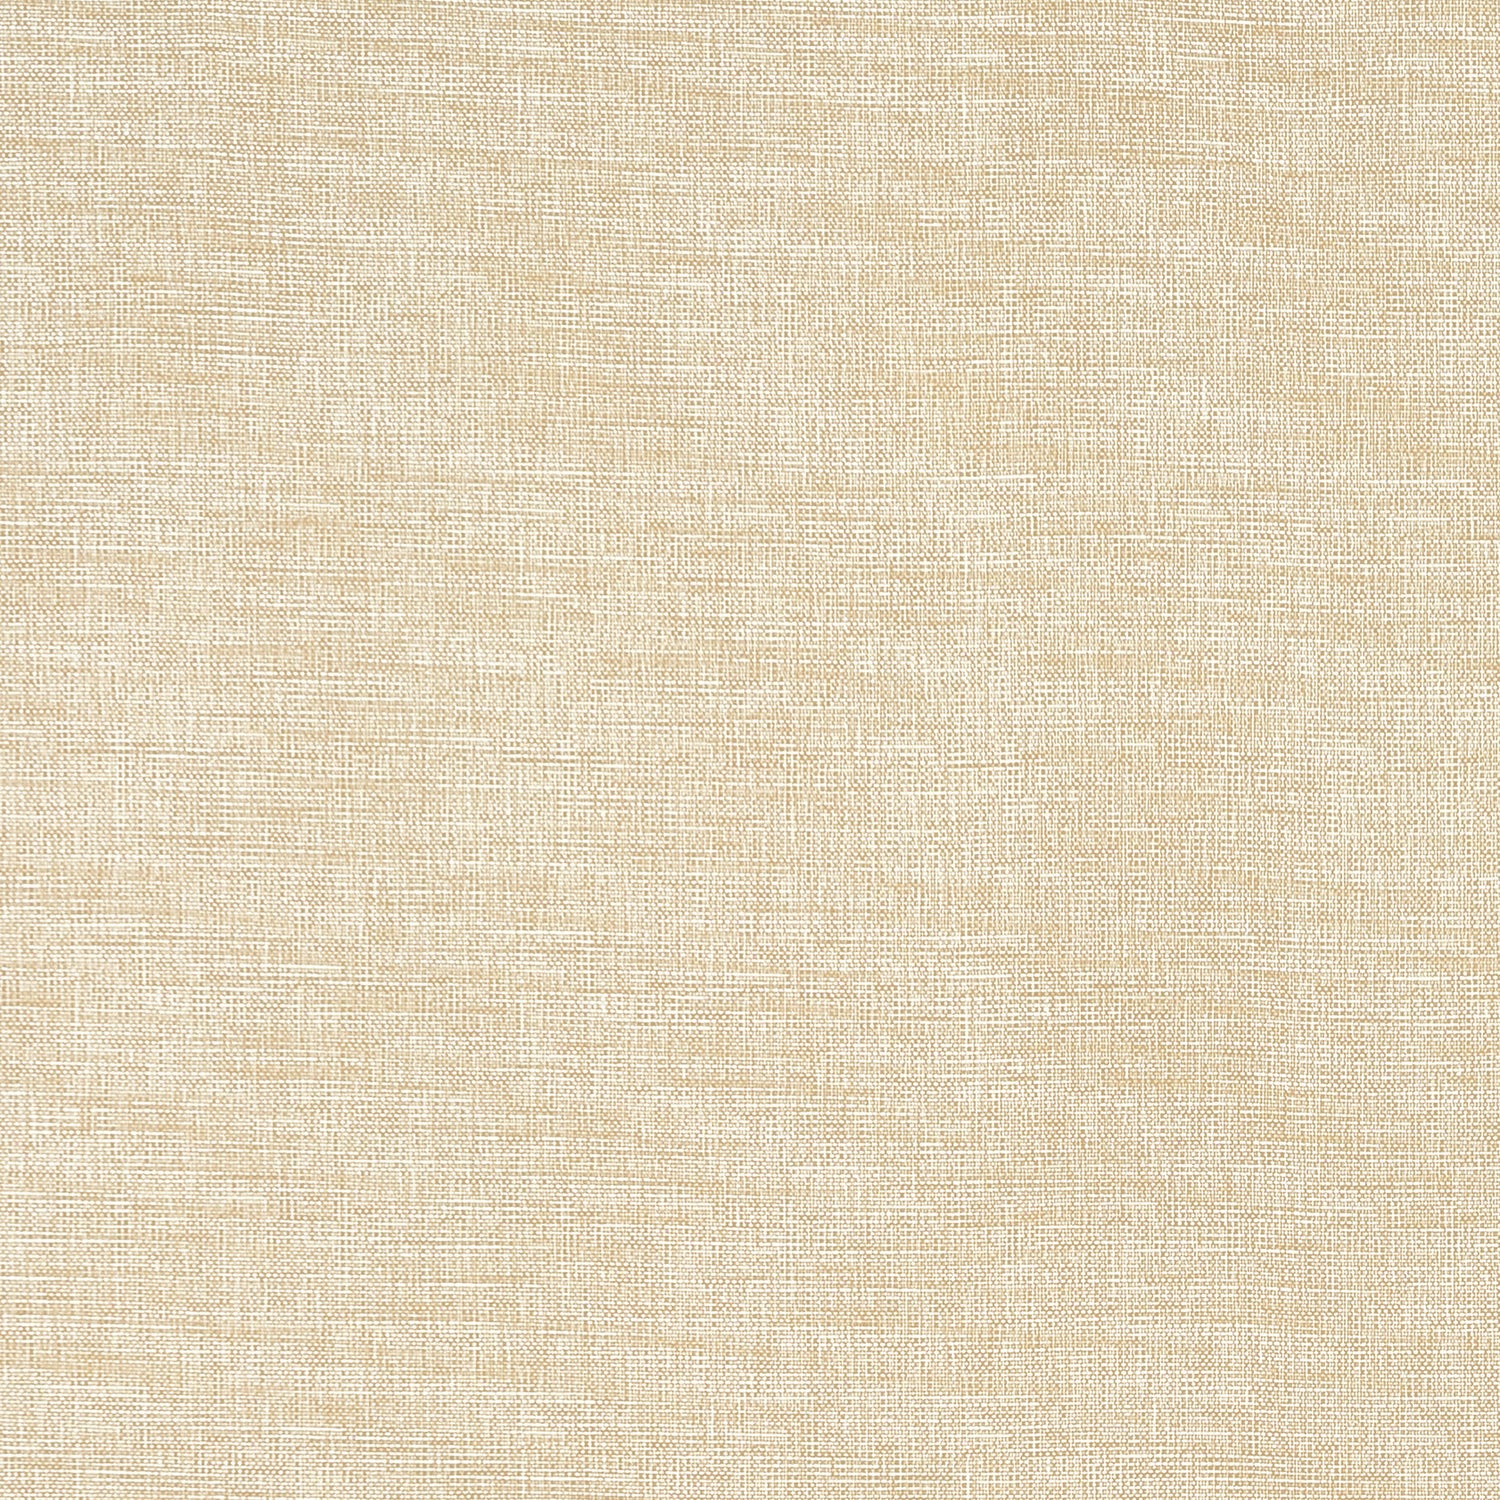 Finley fabric in flax color - pattern number W81611 - by Thibaut in the Locale collection